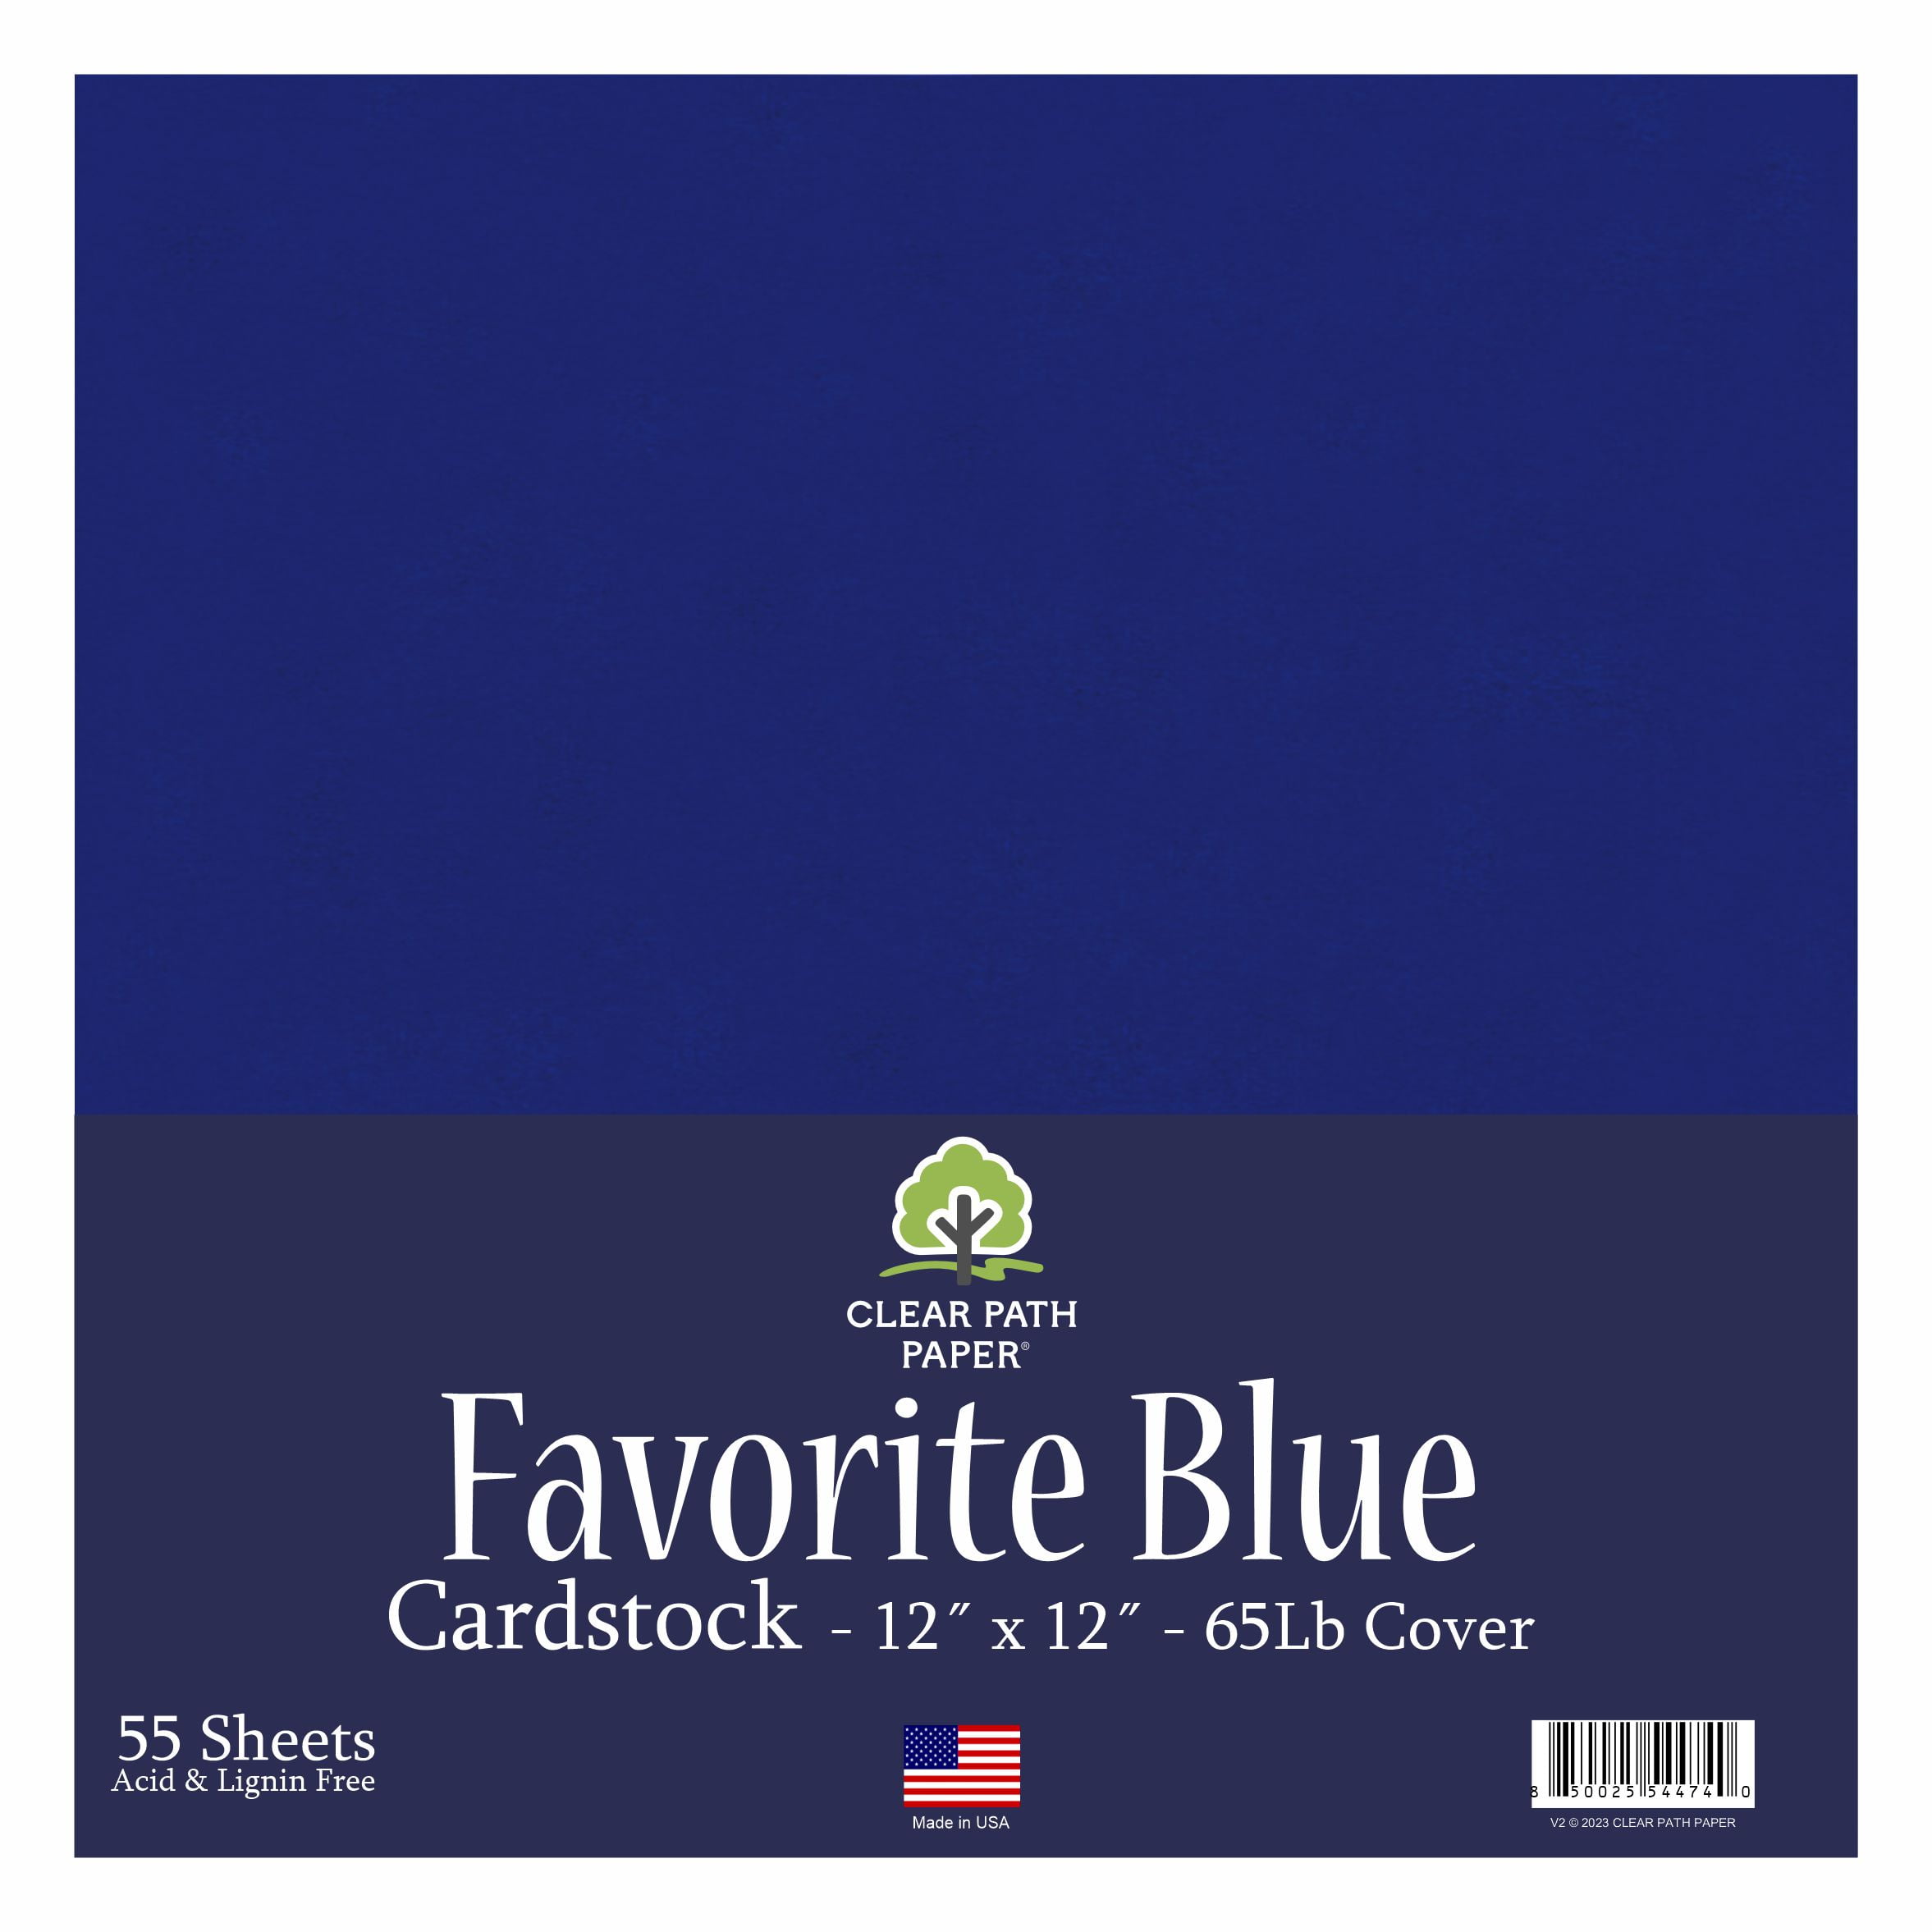 Pacon 103022 Tru-Ray Construction Paper, 76 lbs., 9 x 12, Blue, 50  Sheets/Pack